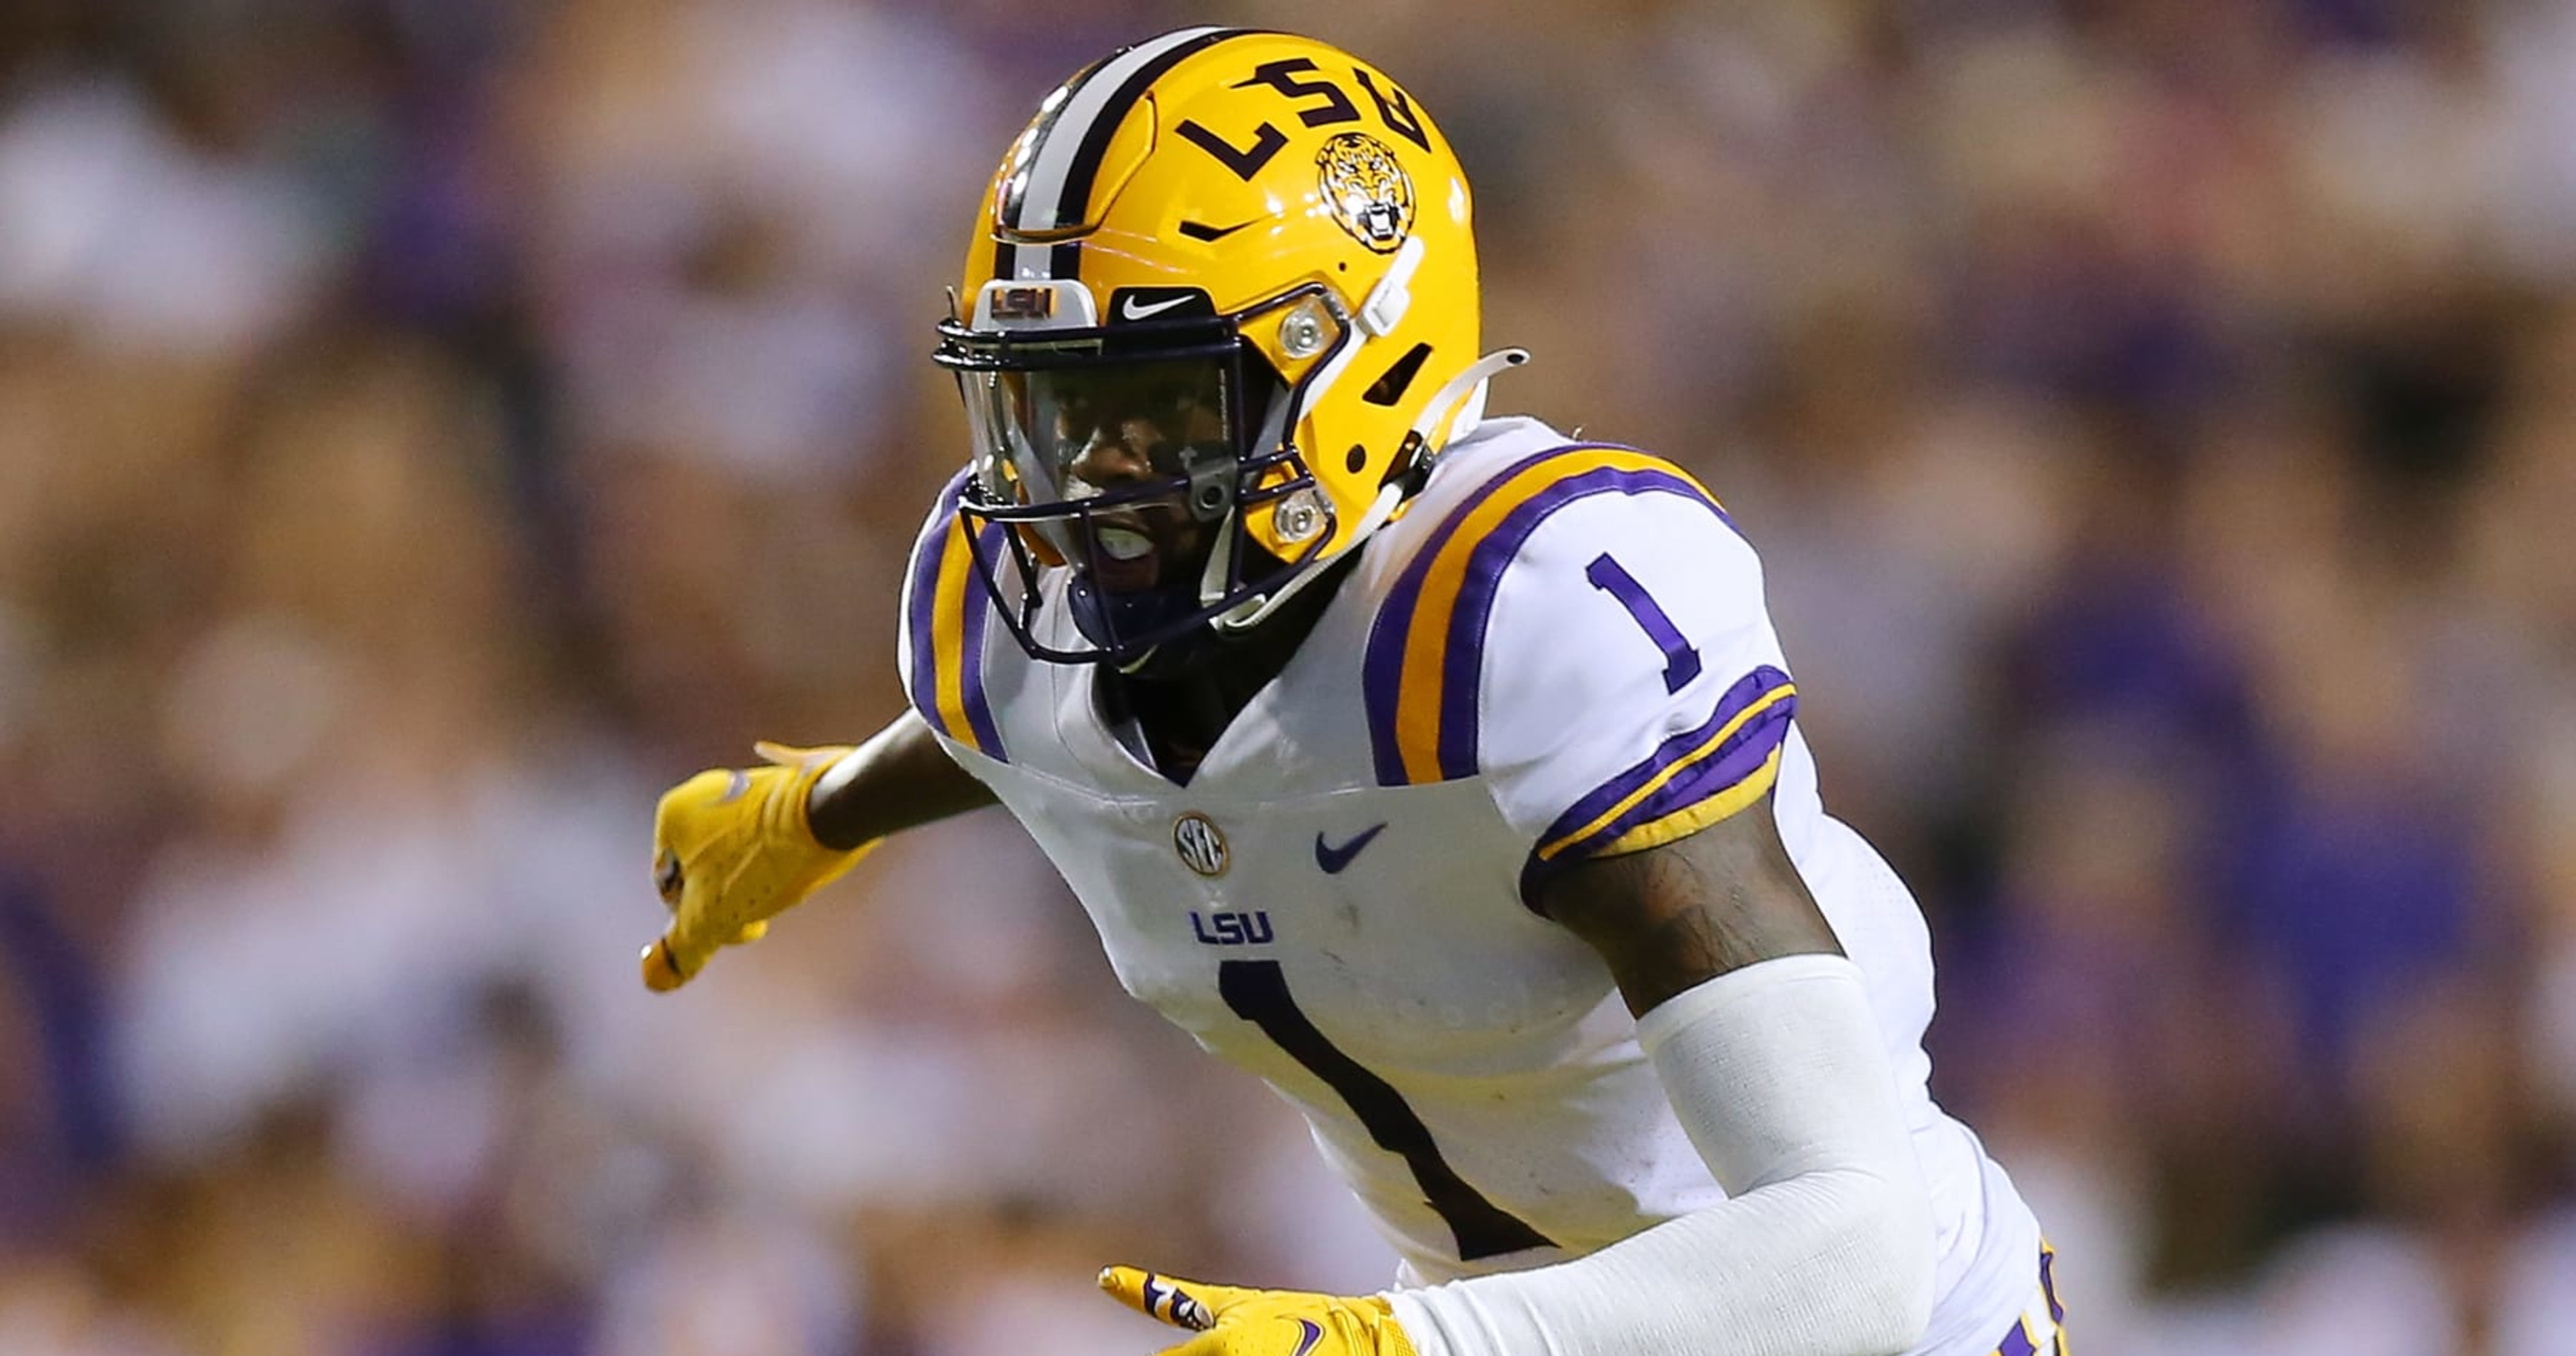 Kayshon Boutte Removes LSU Content from Instagram After Loss to FSU